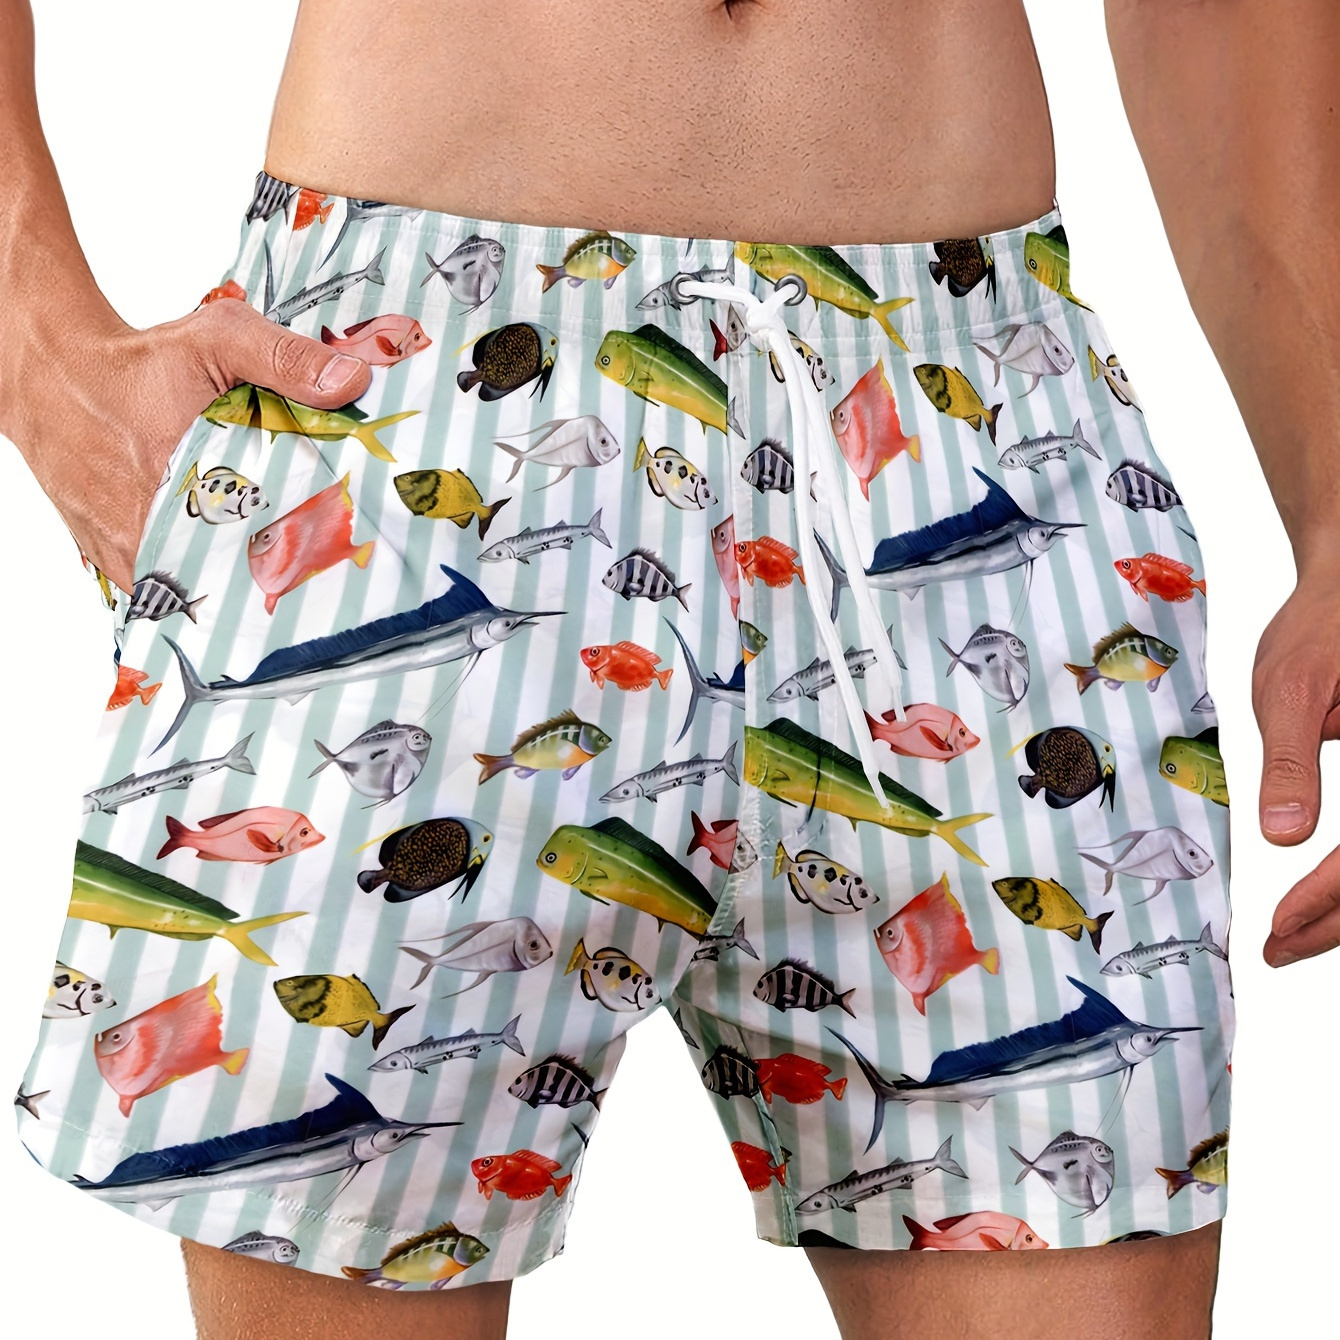 

Men's Loose Beach Shorts Activewear, Drawstring Quick Dry Fish Print Shorts, Lightweight Shorts For Summer Beach Vacation Surfing